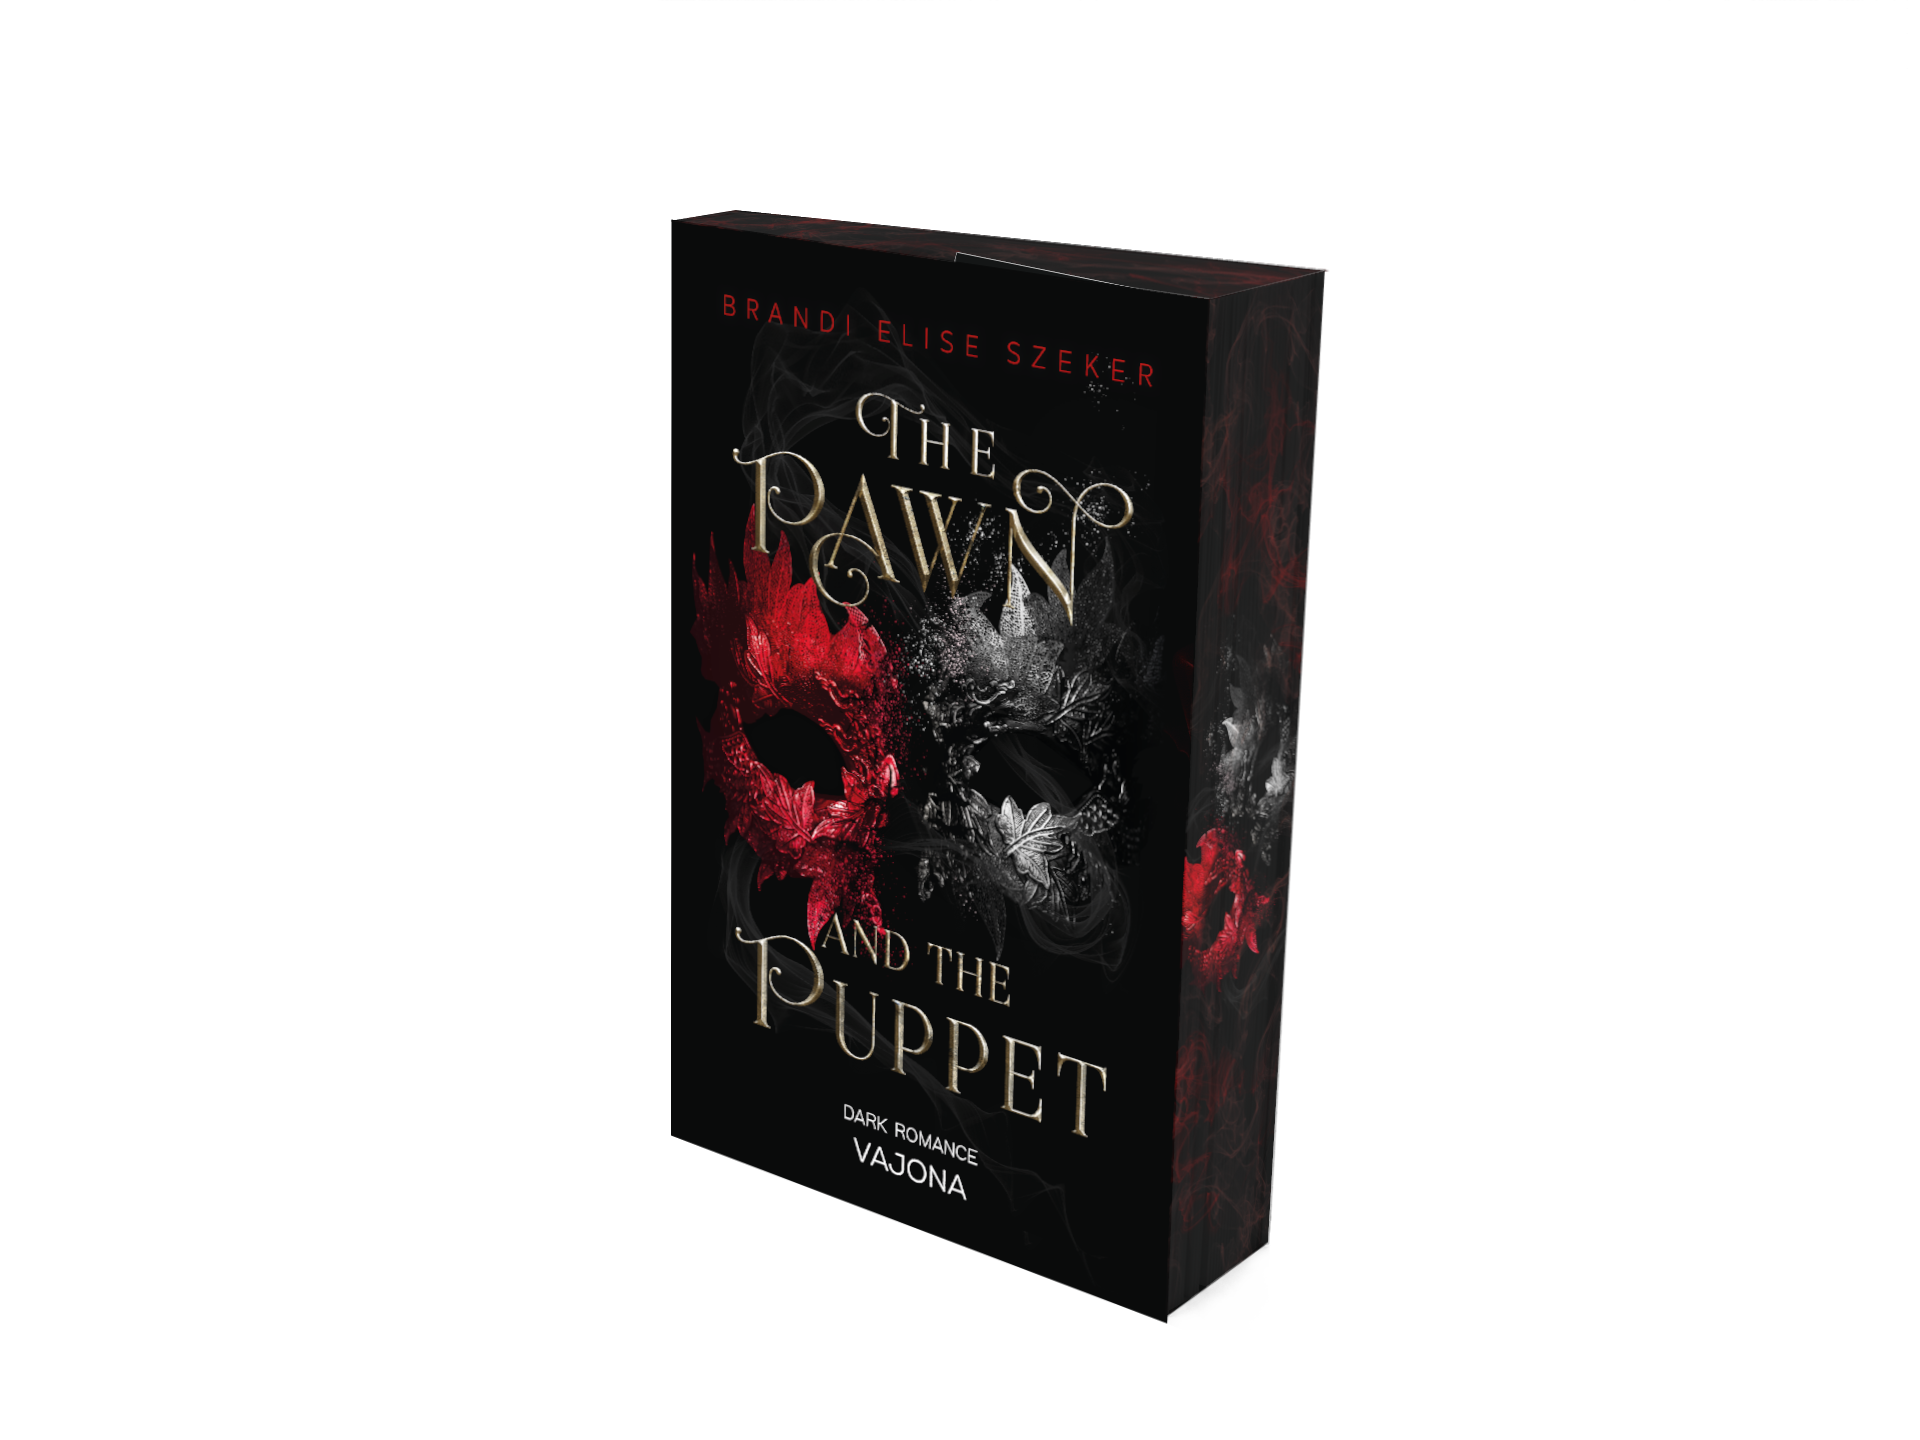 The Pawn And The Puppet (1)